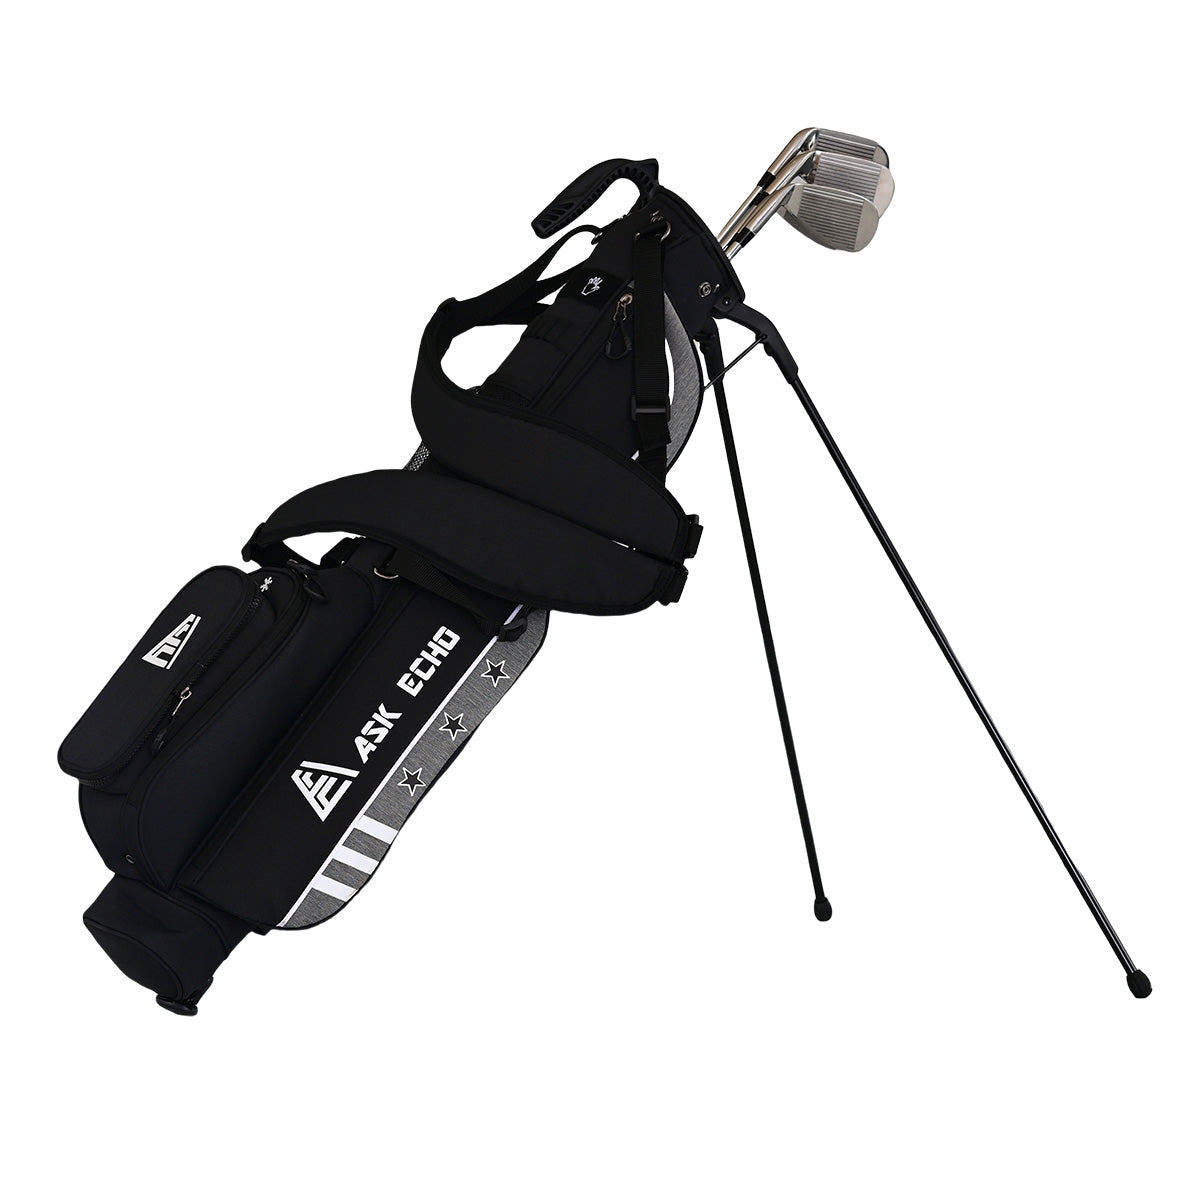 Askecho Golf Sunday Bag Holds Up To 12 Clubs Enjoy Par 3 With Weekend 2.0 / Black